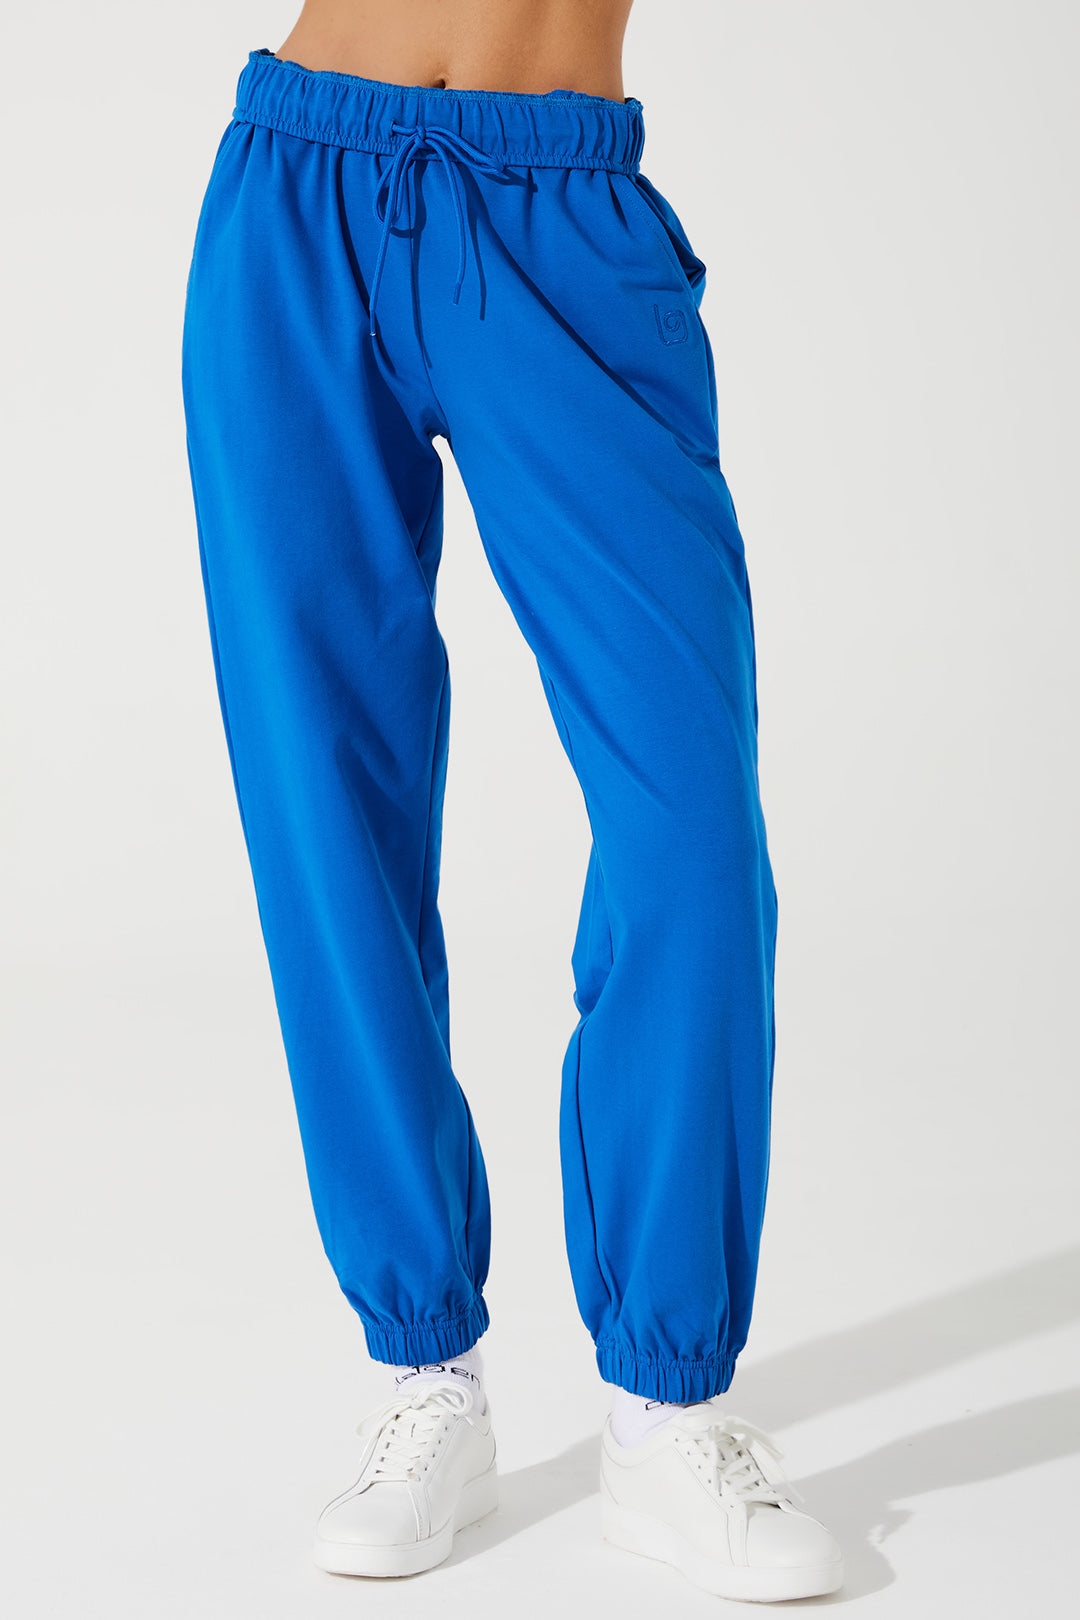 Janet wearing Atlantis Blue sweatpants for women, style OW-0036-WSW-BL, in a woman_janet_sweatpant image.